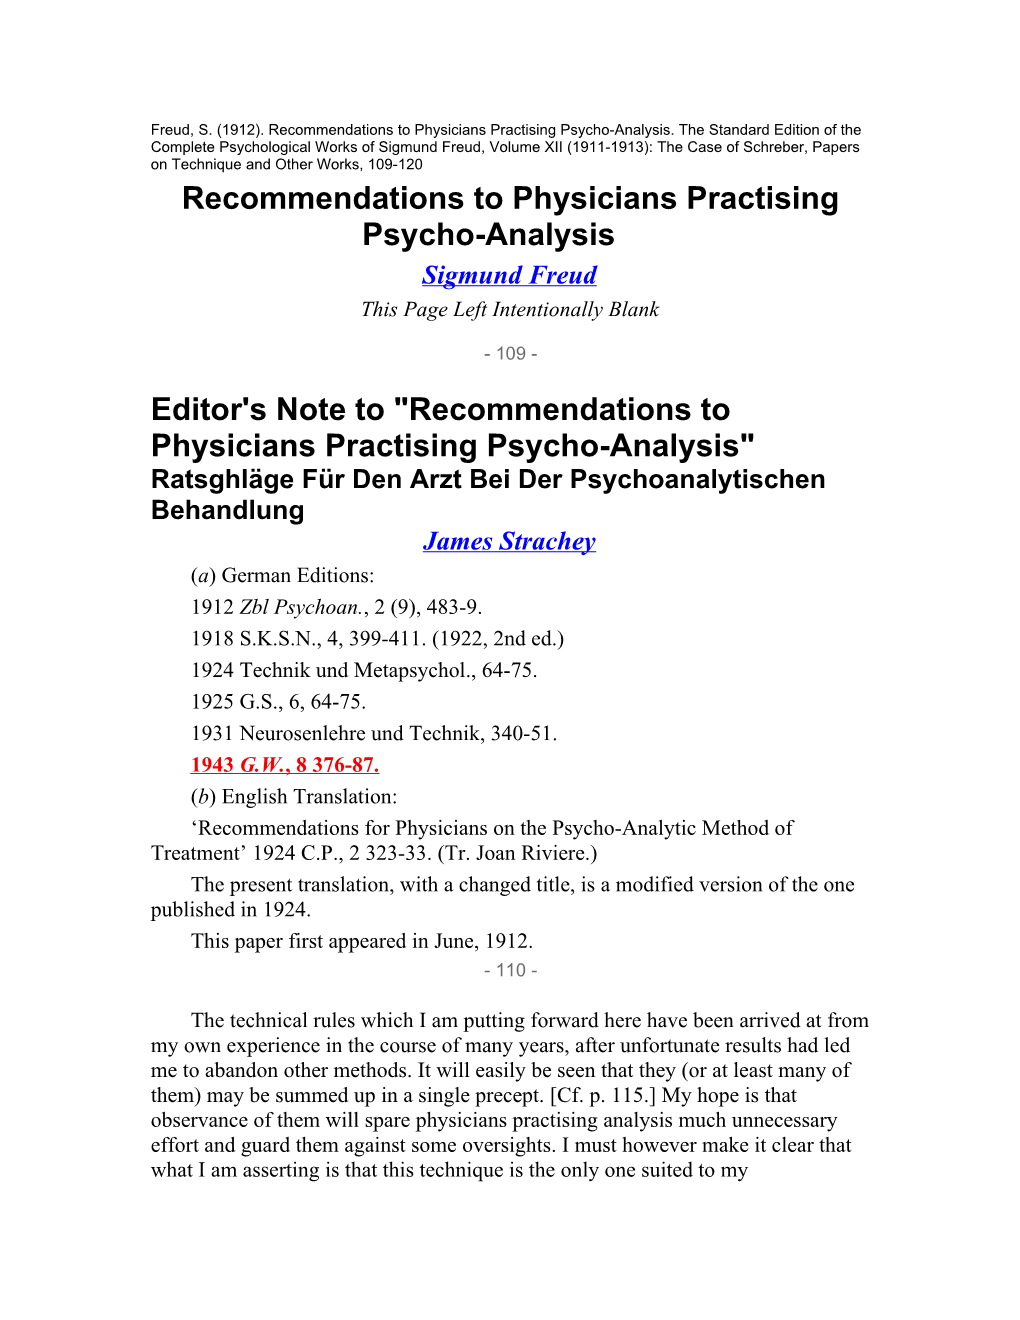 Recommendations to Physicians Practising Psycho-Analysis